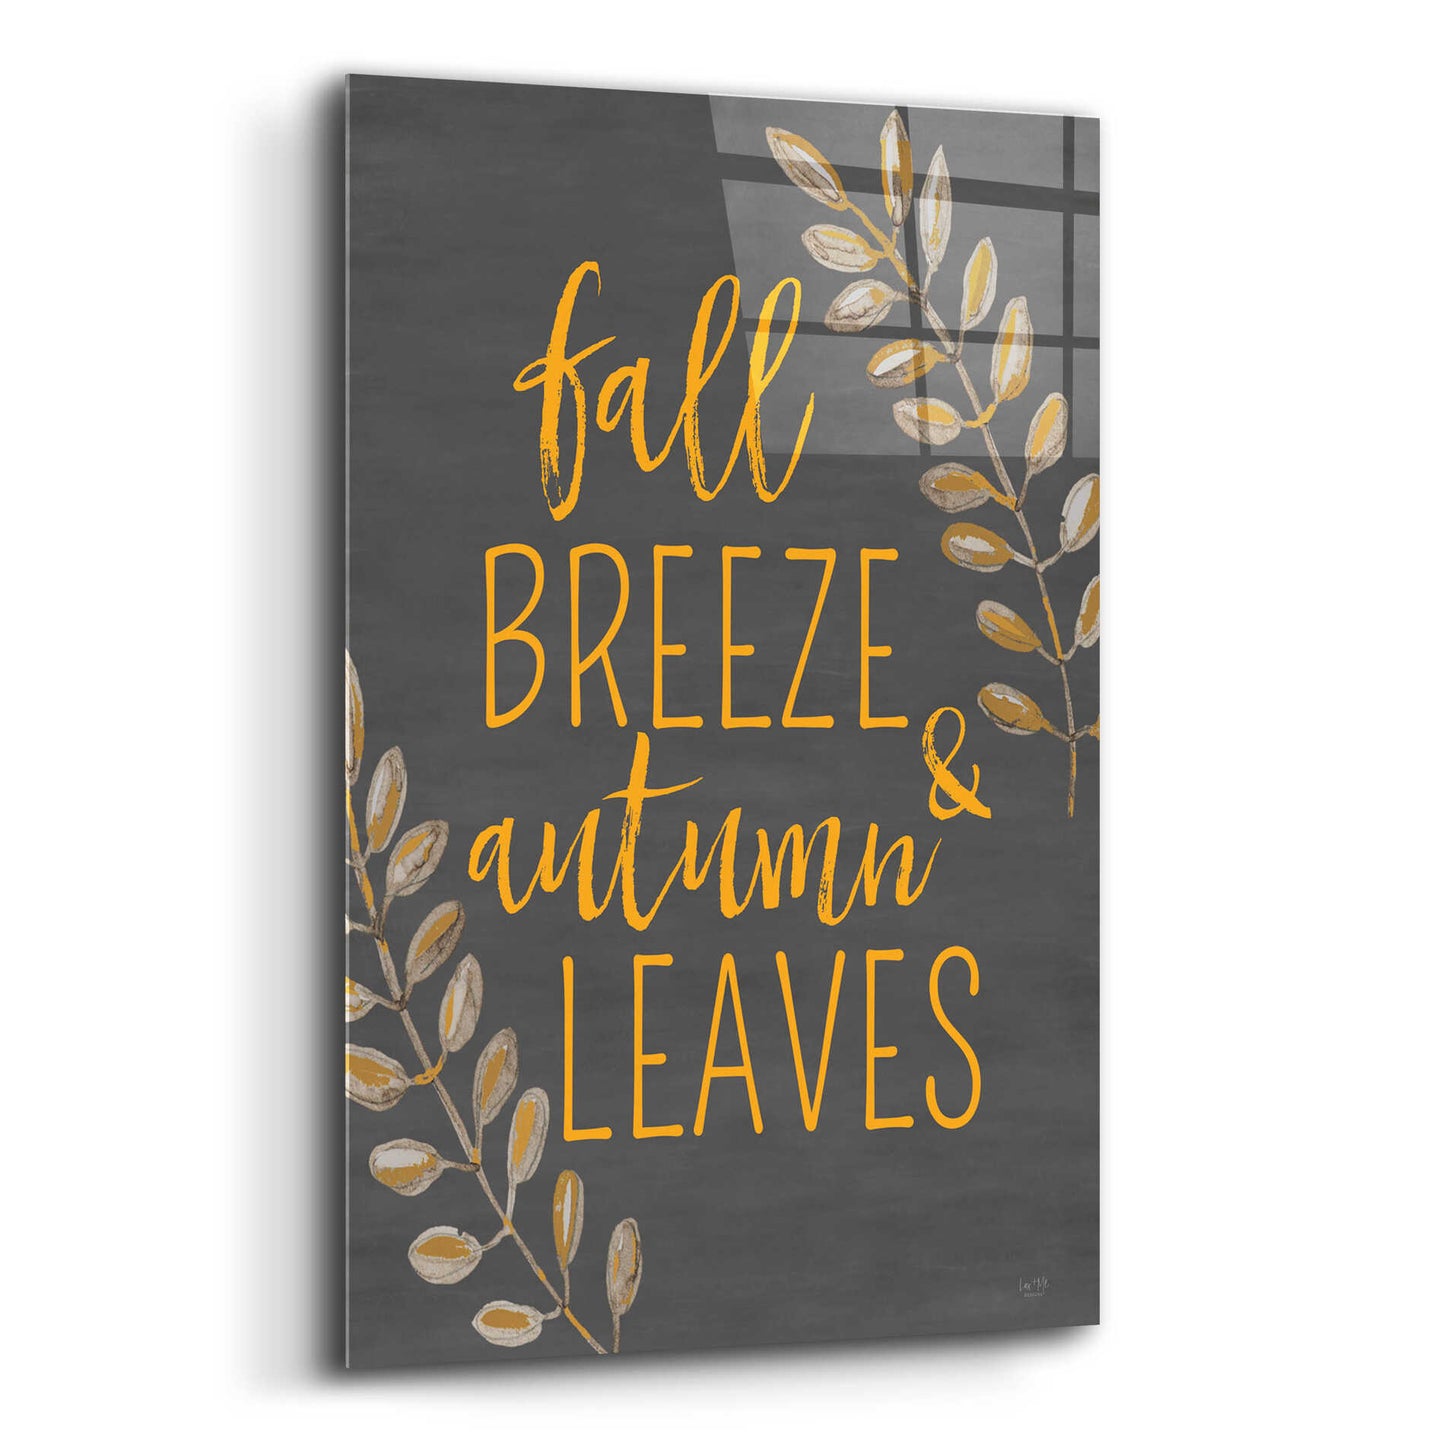 Epic Art 'Fall Breeze & Autumn Leaves' by Lux + Me Designs, Acrylic Glass Wall Art,16x24